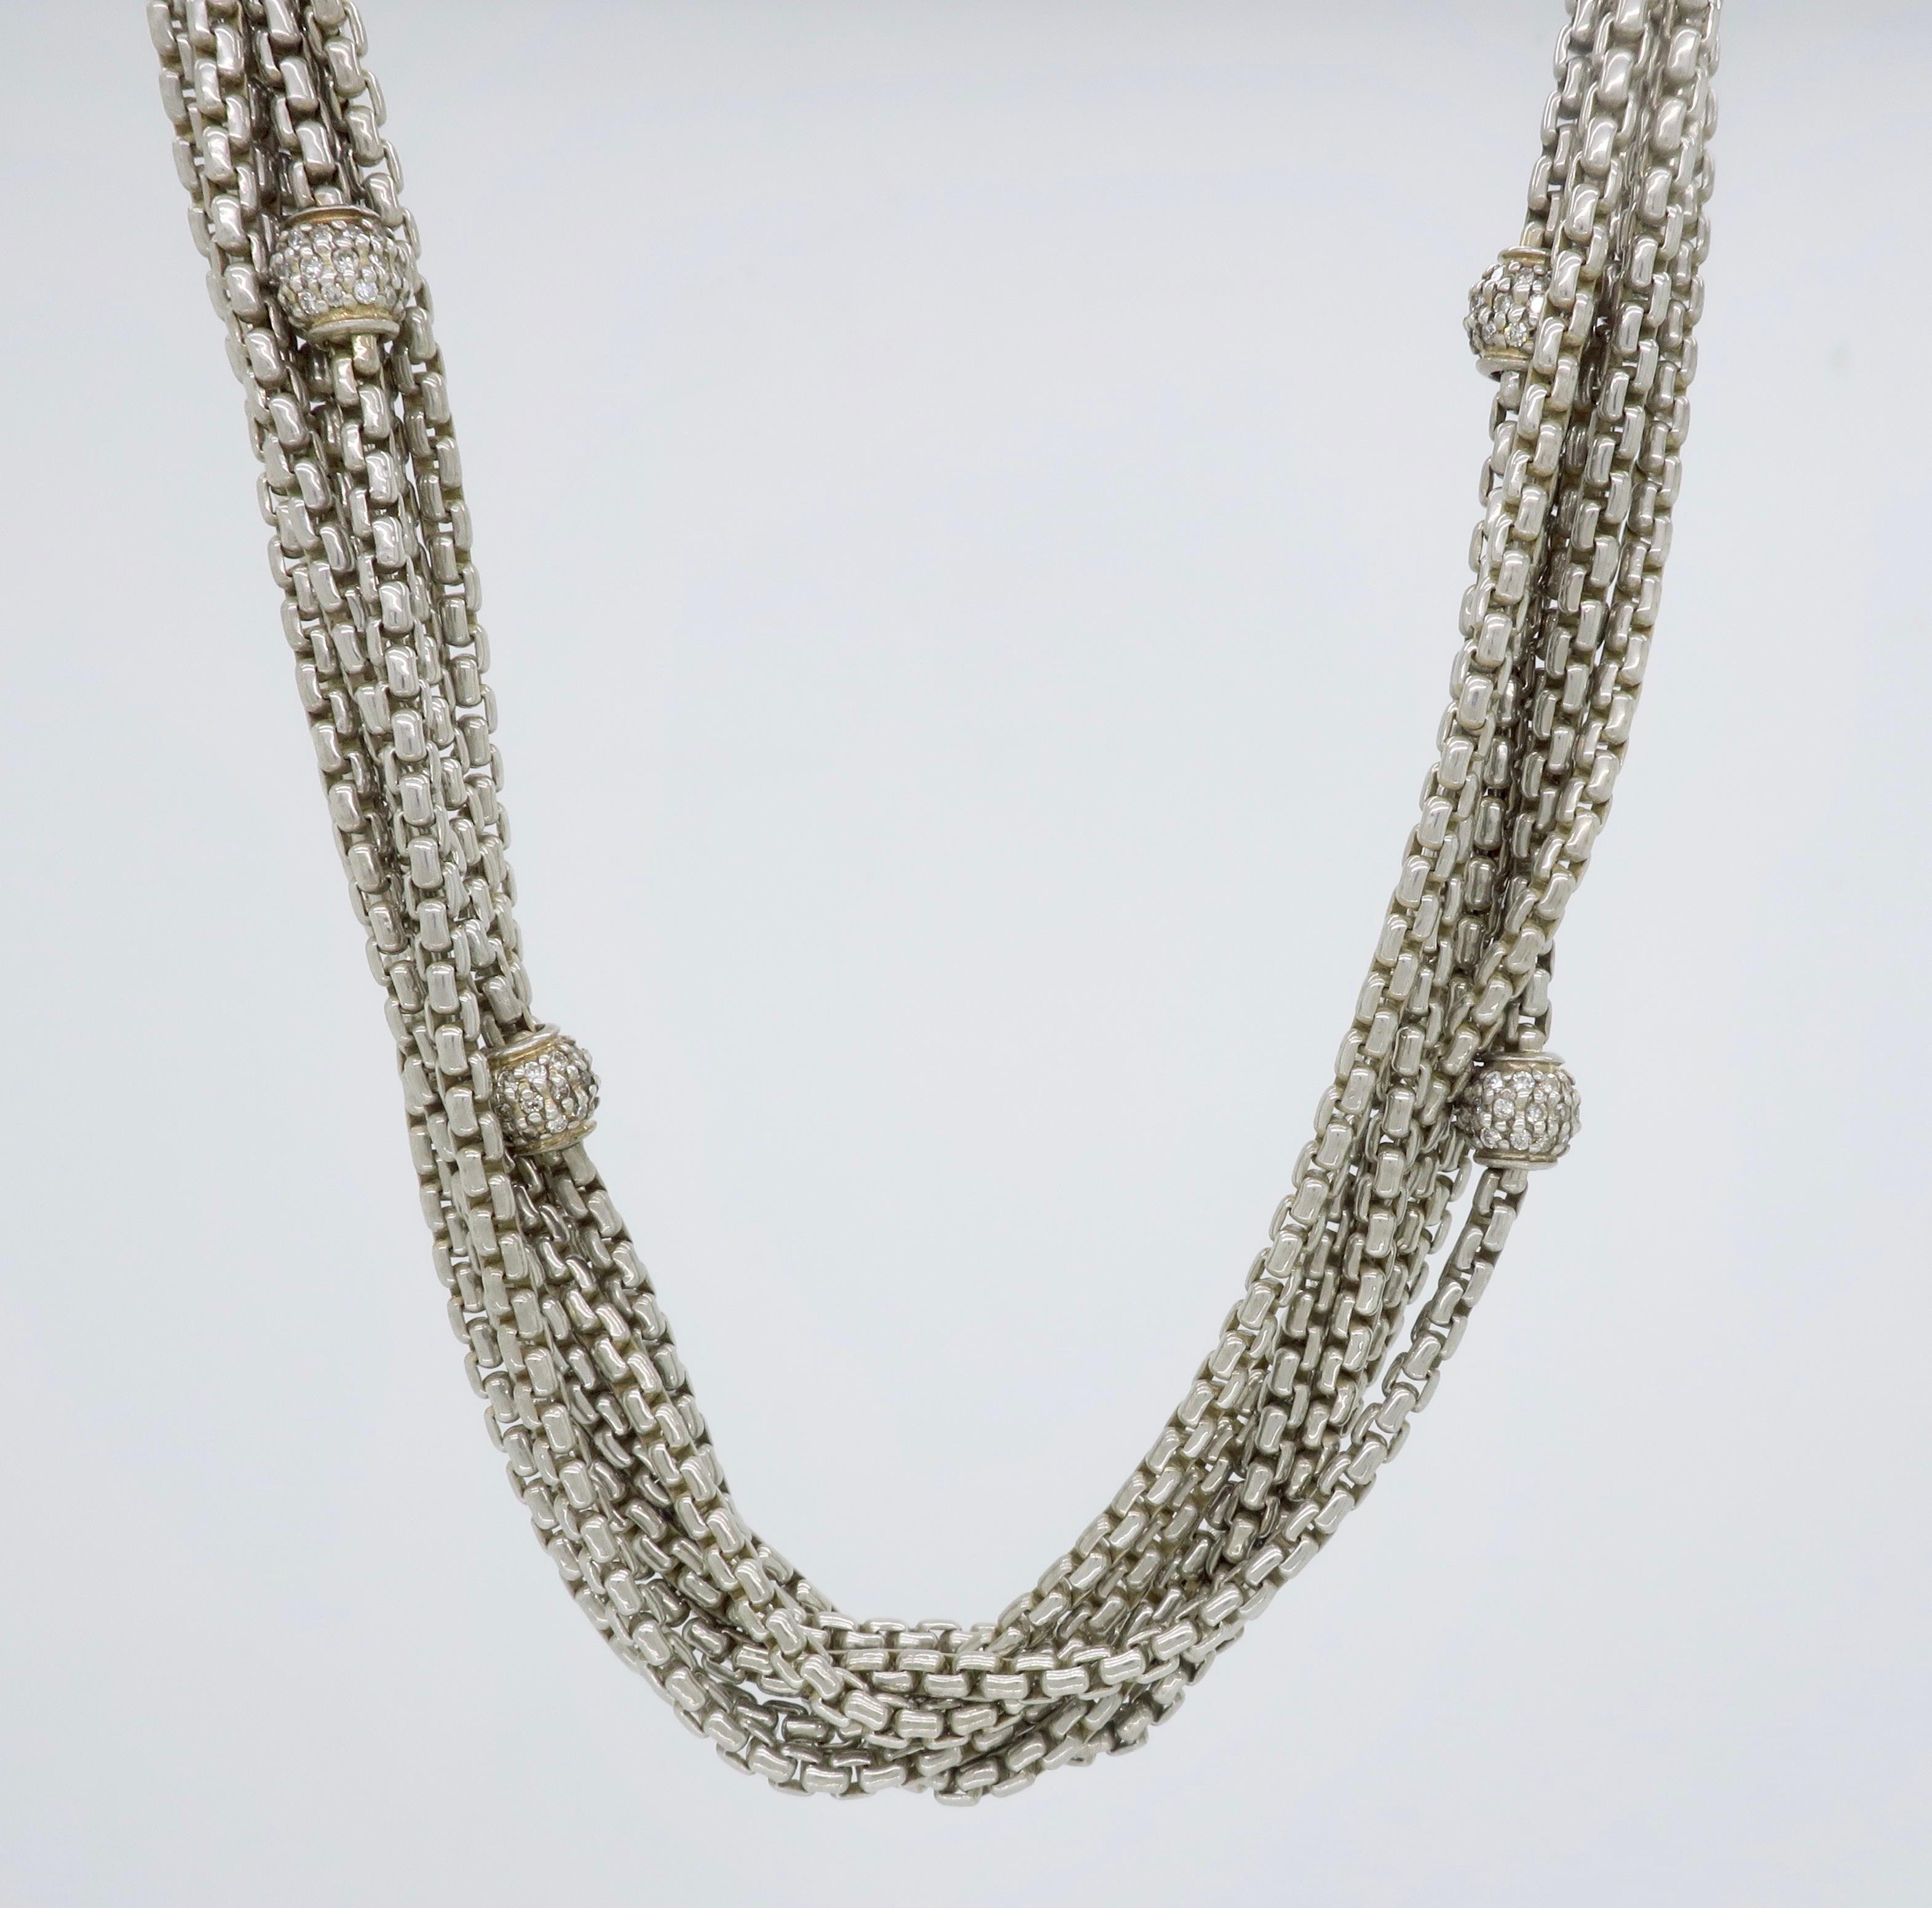 Multi-stranded station diamond necklace crafted in sterling silver and 18k yellow gold by designer David Yurman.

Designer: David Yurman
Diamond Carat Weight: Approximately 1.36CTW
Diamond Cut: Round Brilliant 
Color: Average H-J
Clarity: Average